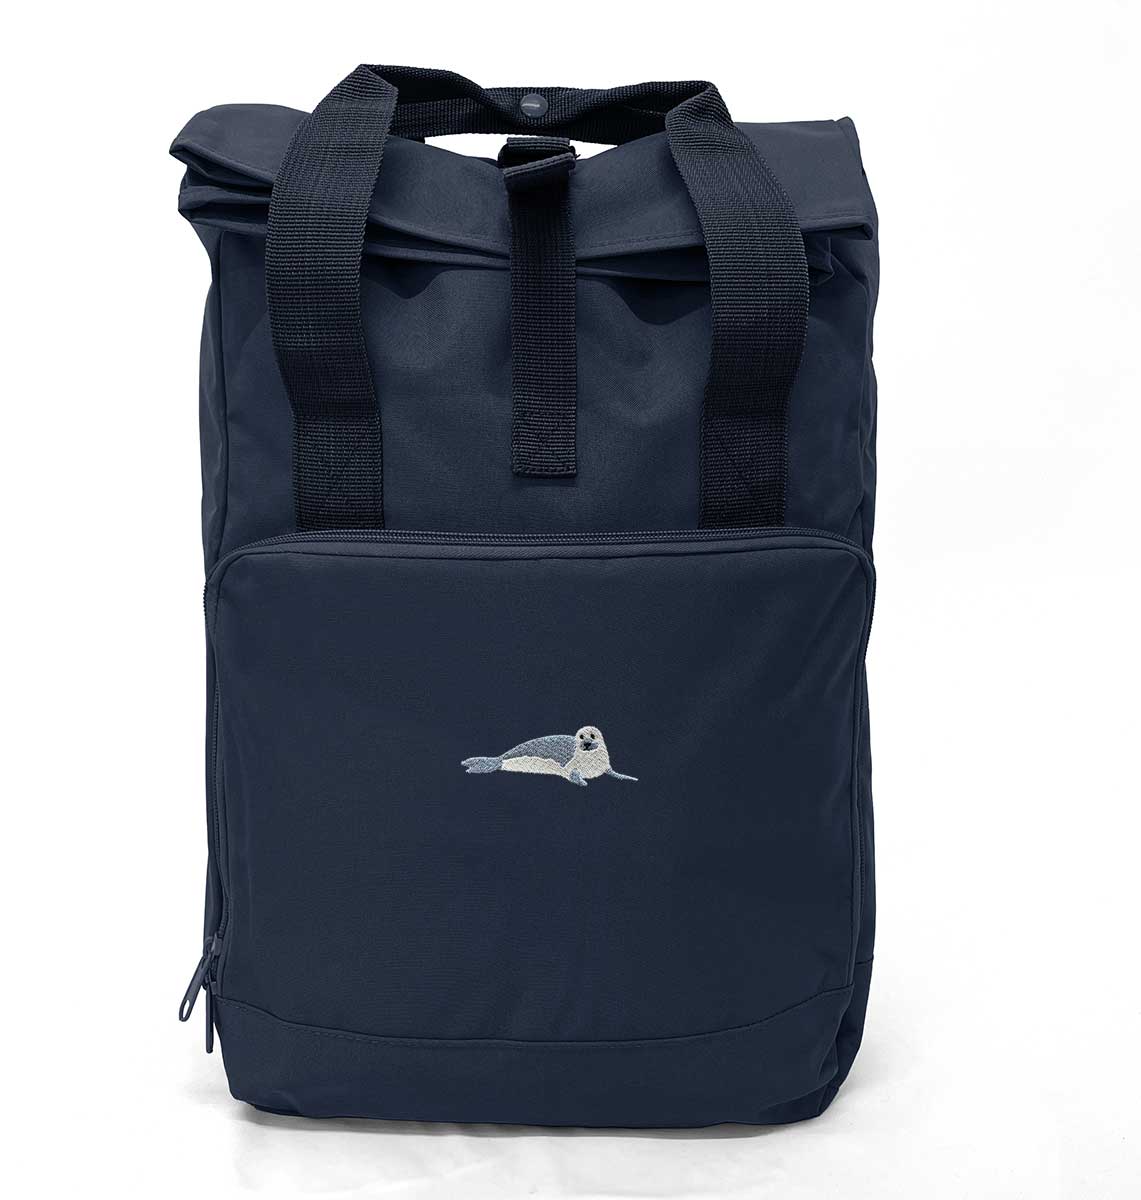 Seal Large Roll-top Laptop Recycled Backpack - Blue Panda